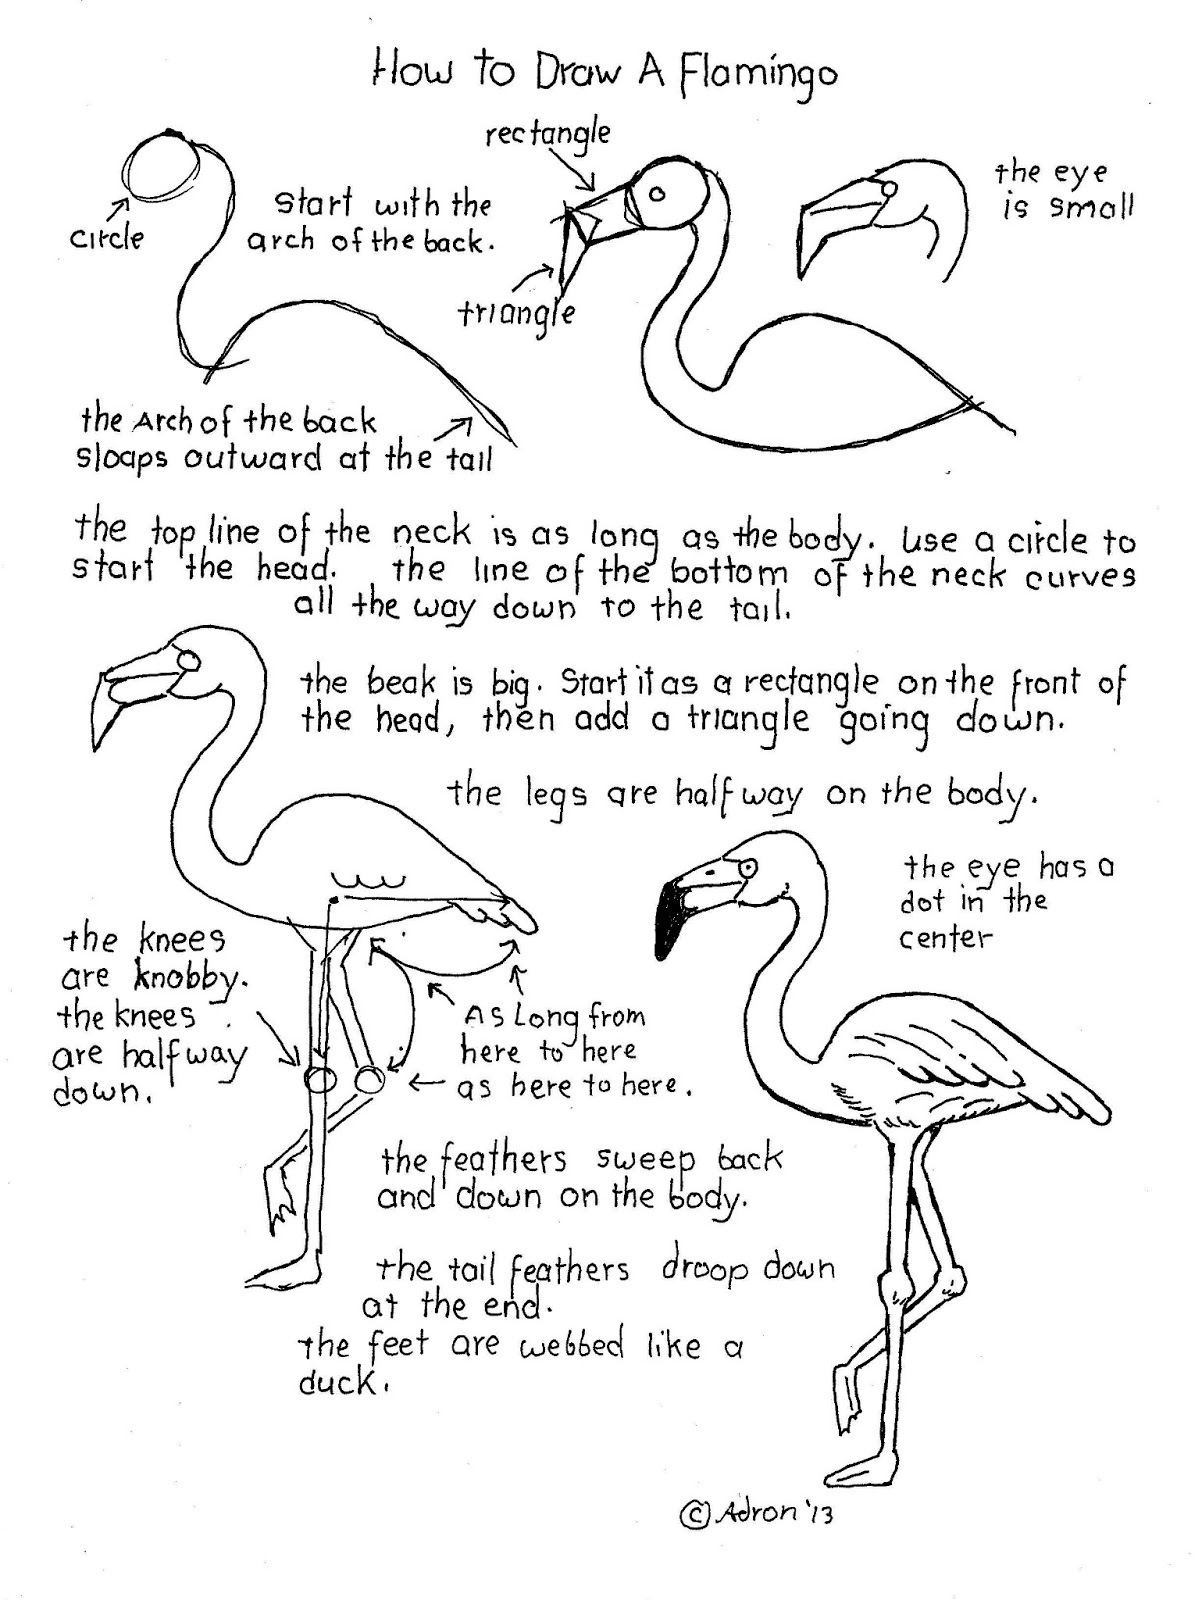 how-to-draw-worksheets-for-the-young-artist-how-to-draw-a-flamingo-worksheet-and-lesson